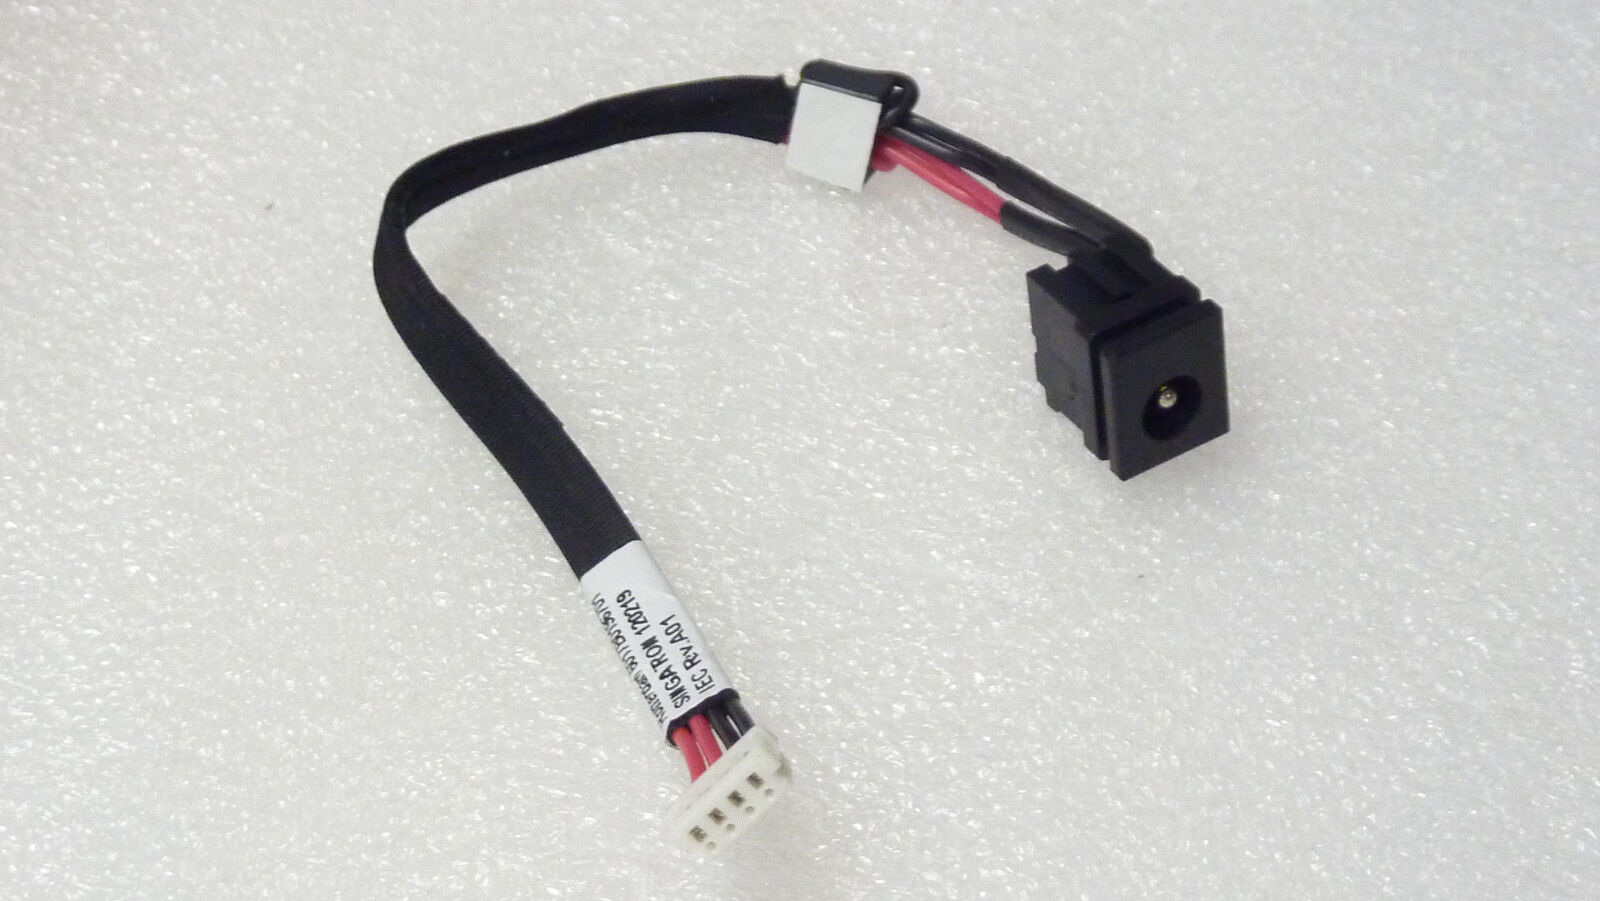 DC Power Jack Harness Cable Toshiba Satellite A305-S6833 A305-S6834 A305-S6837